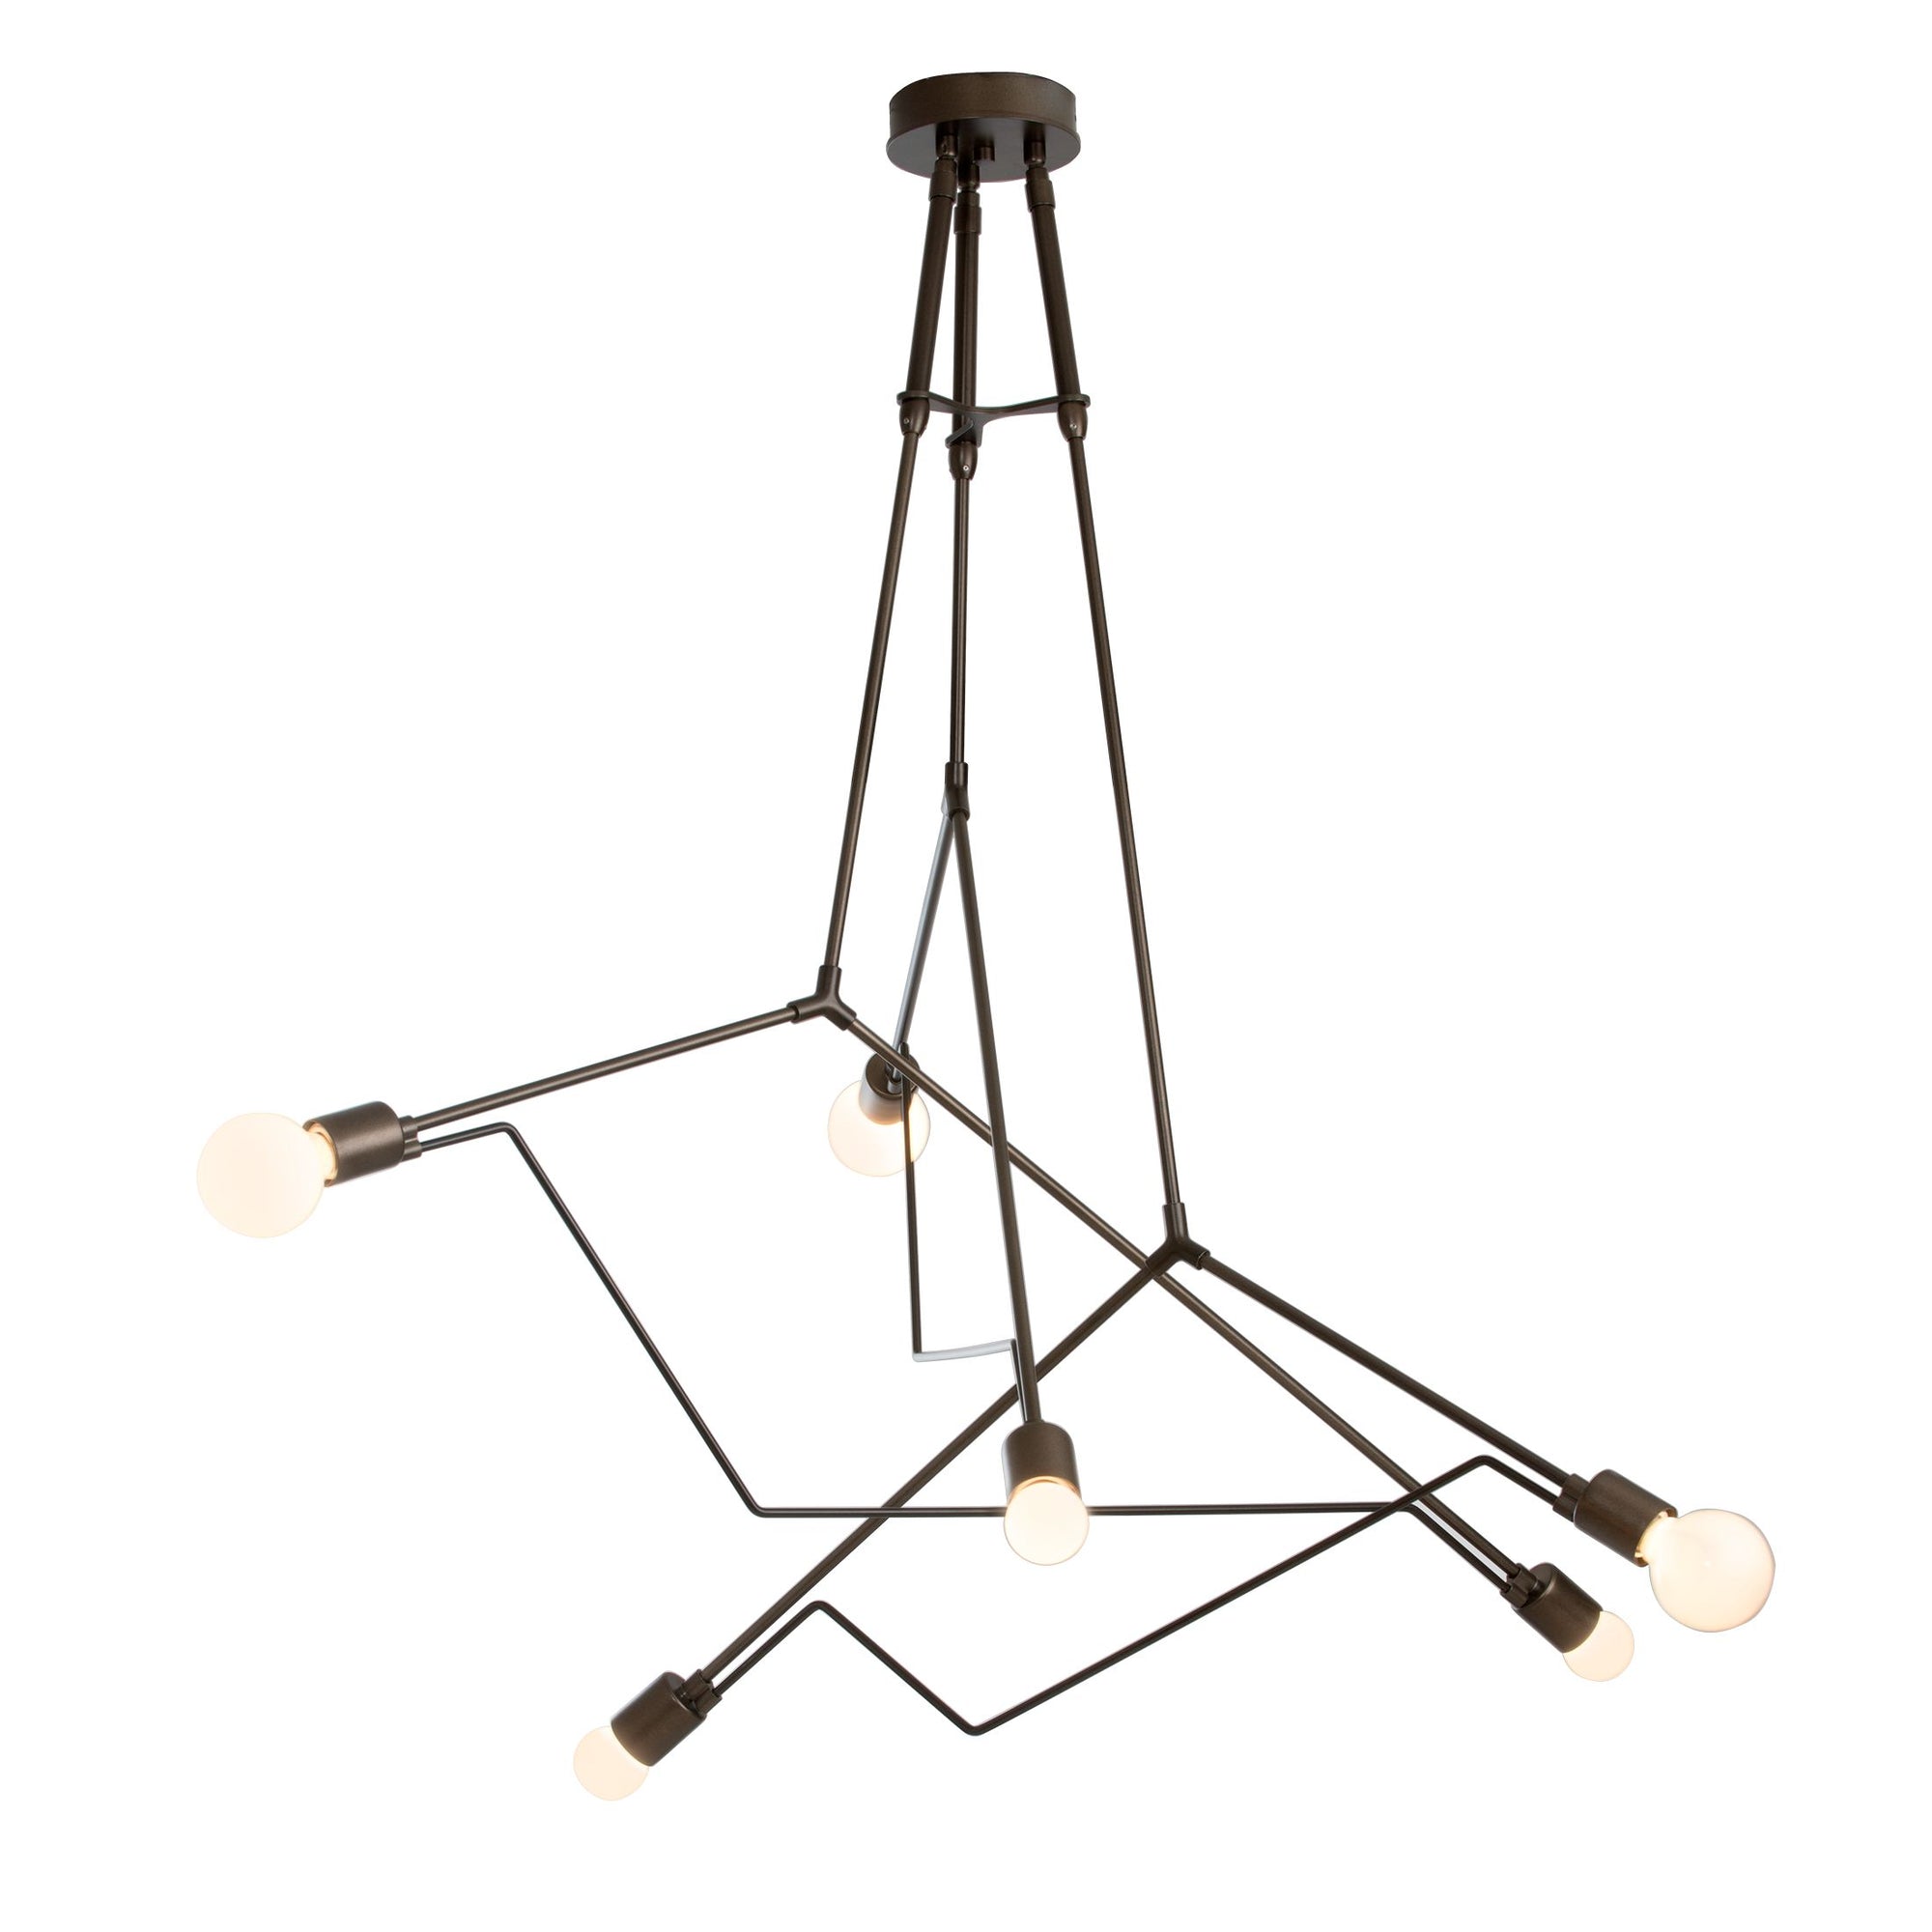 Hubbardton Forge Divergence outdoor pendant